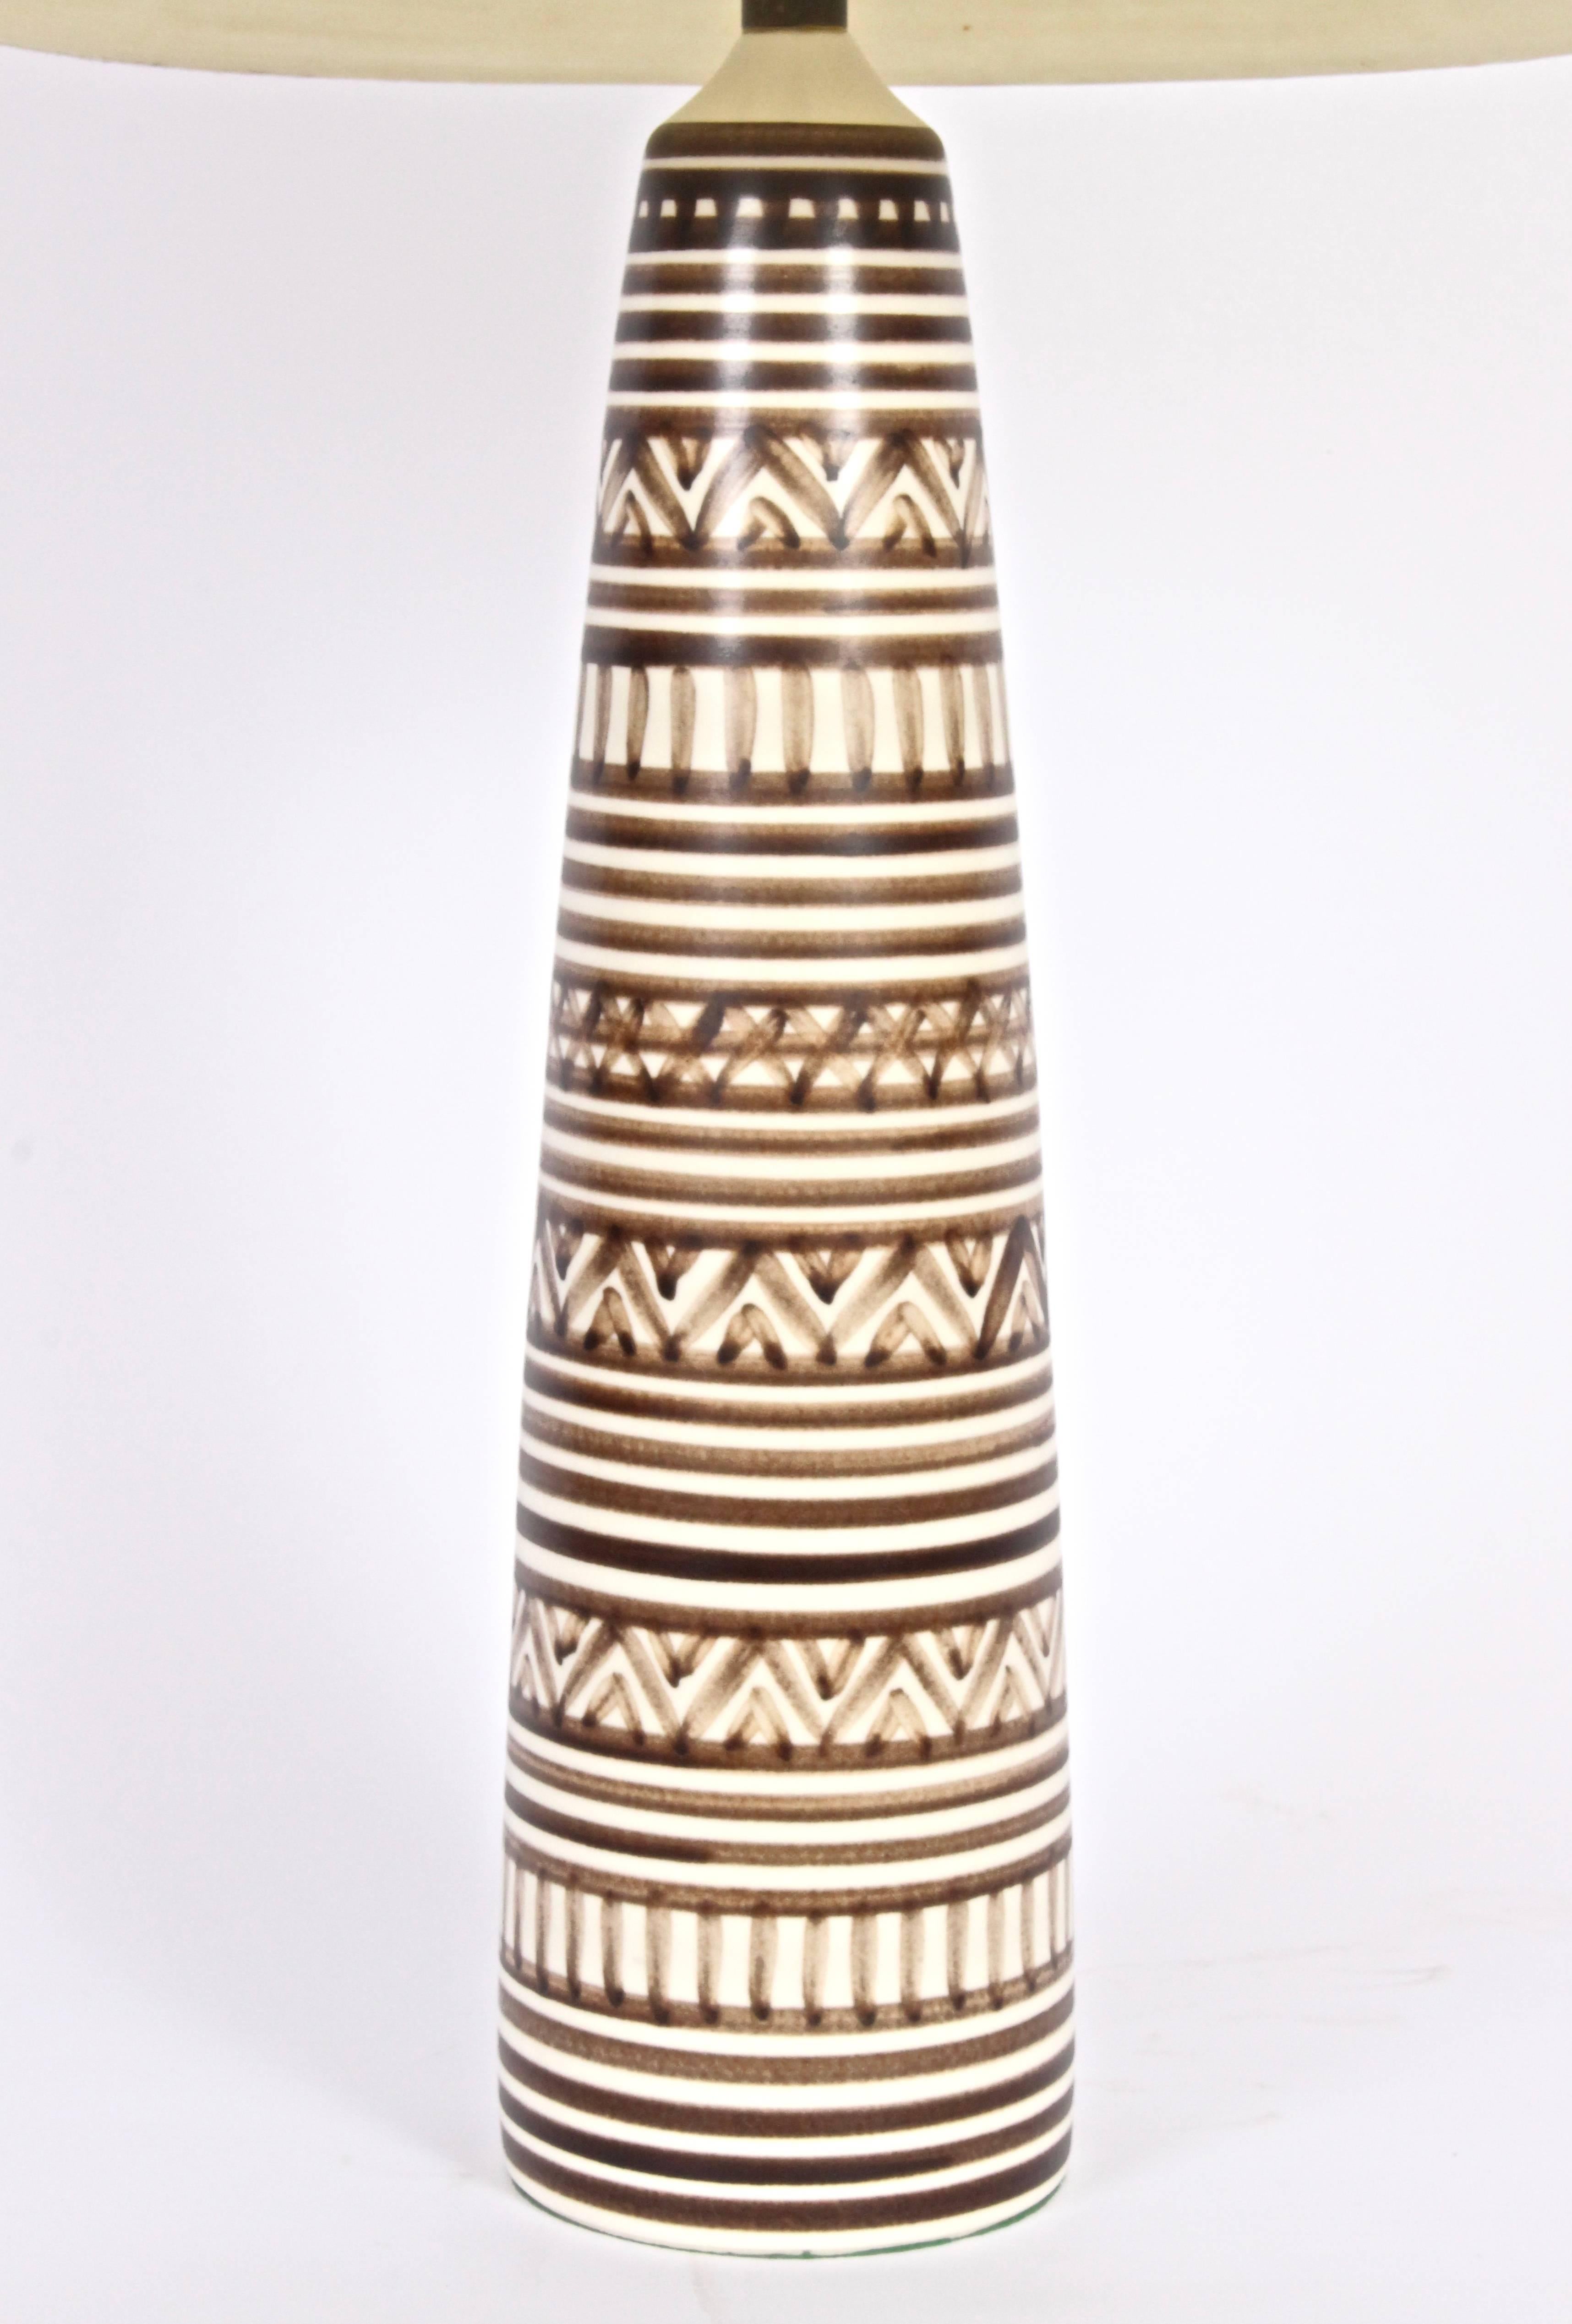 Danish Modern Bostlund Hand Painted Glazed Stoneware Table Lamp with original Cream Jute Shade. Featuring a hand-painted glazed pottery form with geometric patterns referencing indigenous design in Off-White, Dark Brown, Coffee, Cream. WIth organic